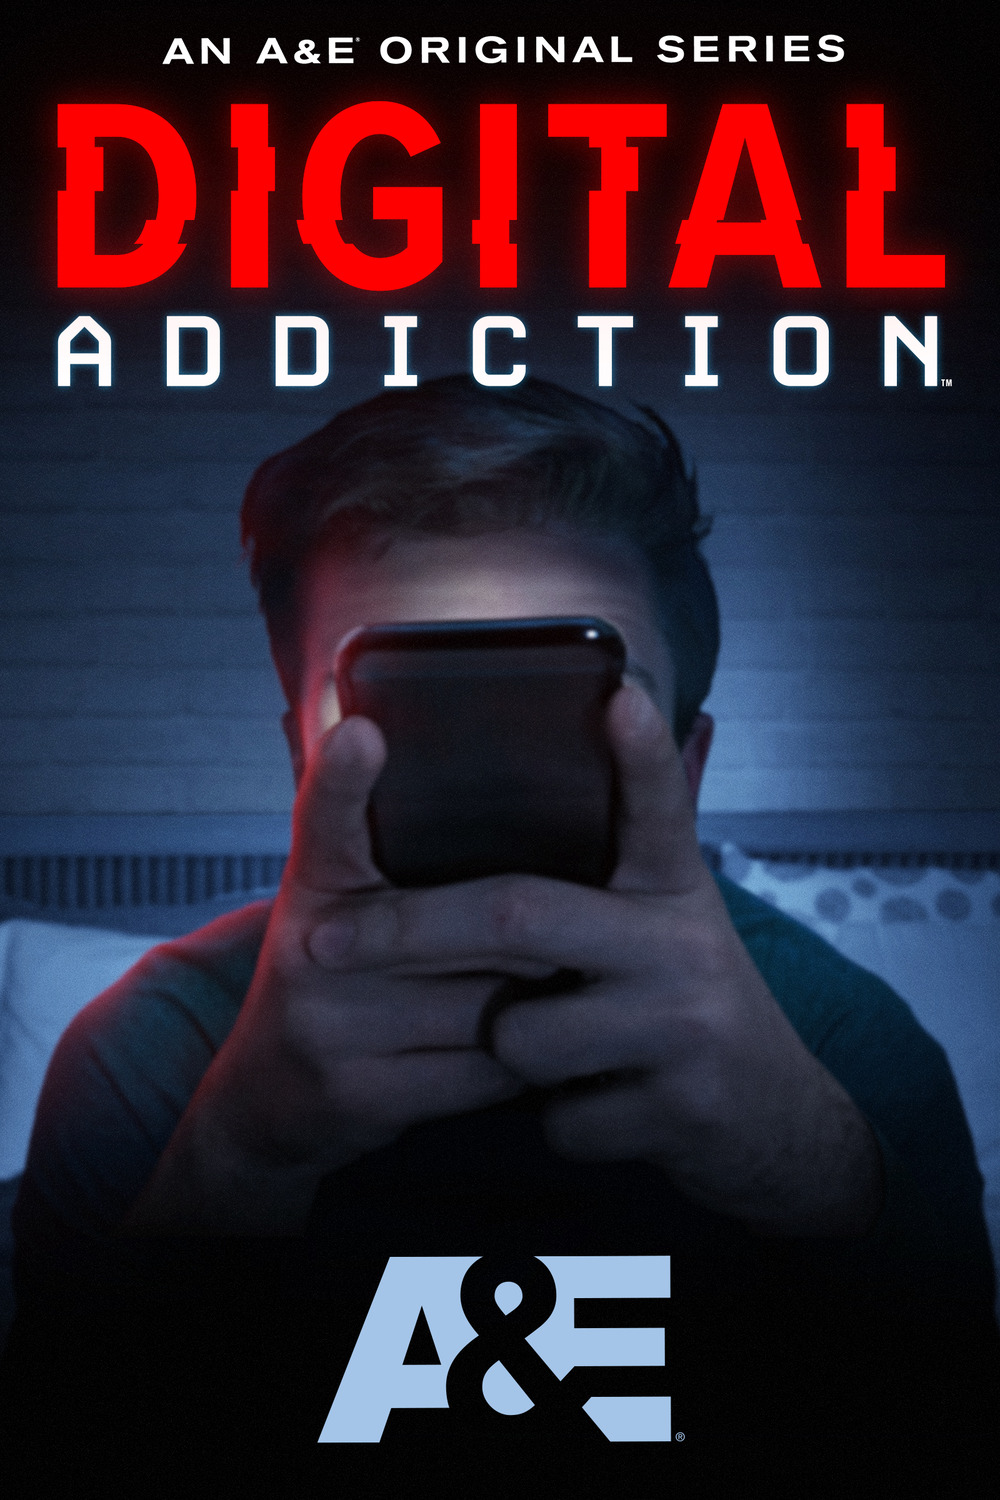 Extra Large TV Poster Image for Digital Addiction 